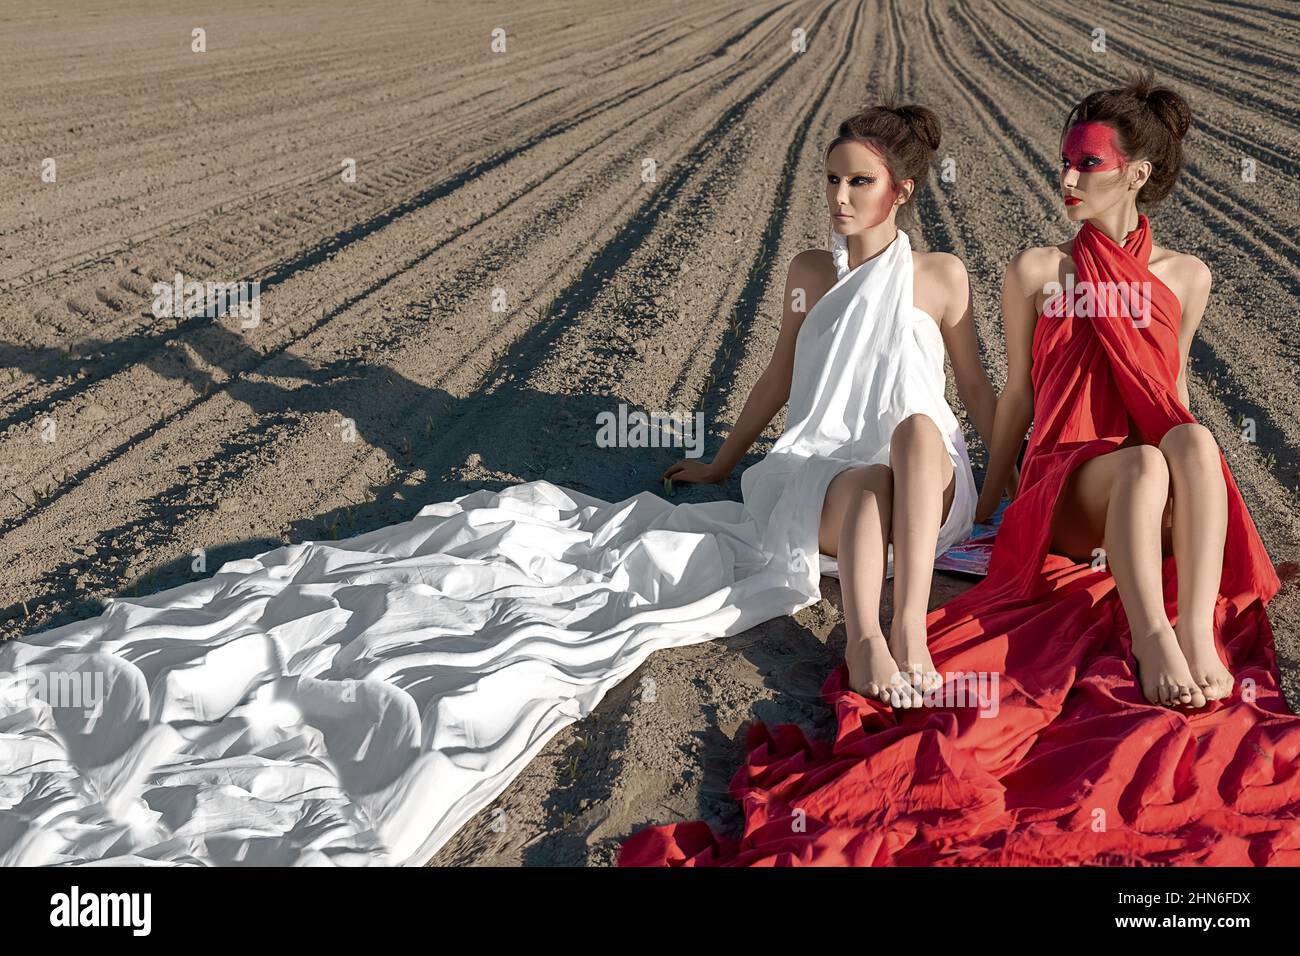 Portrait of two girls with creative body art make-up sitting on the bare ground Stock Photo